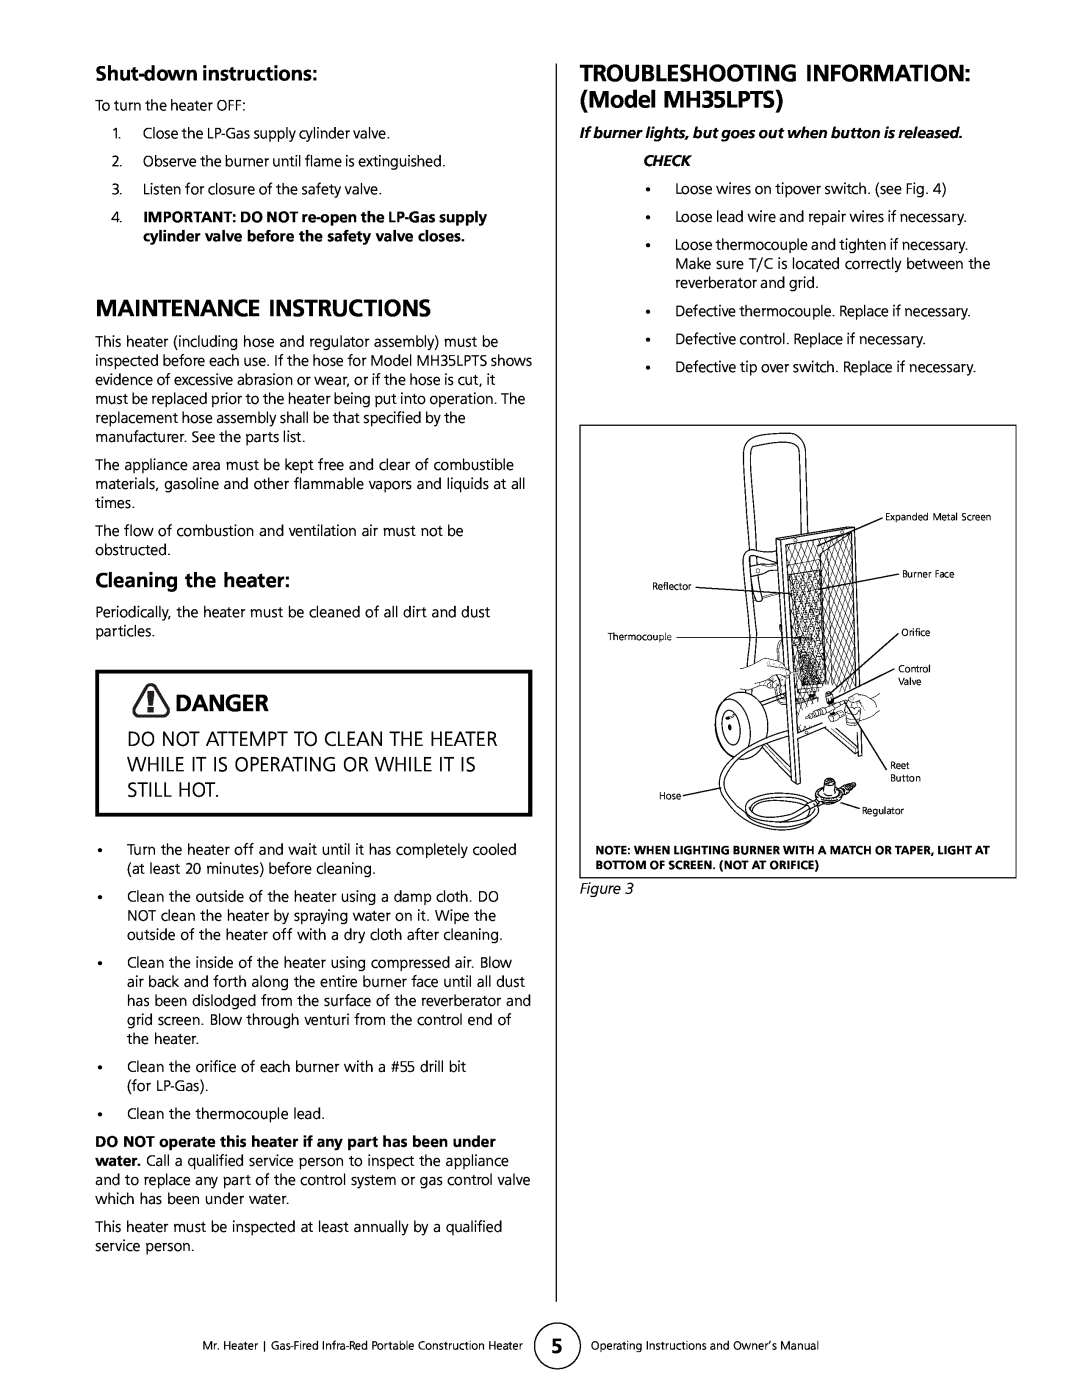 Mr. Heater MH35LPTS owner manual Maintenance Instructions, Danger, Shut-downinstructions, Cleaning the heater, Check 